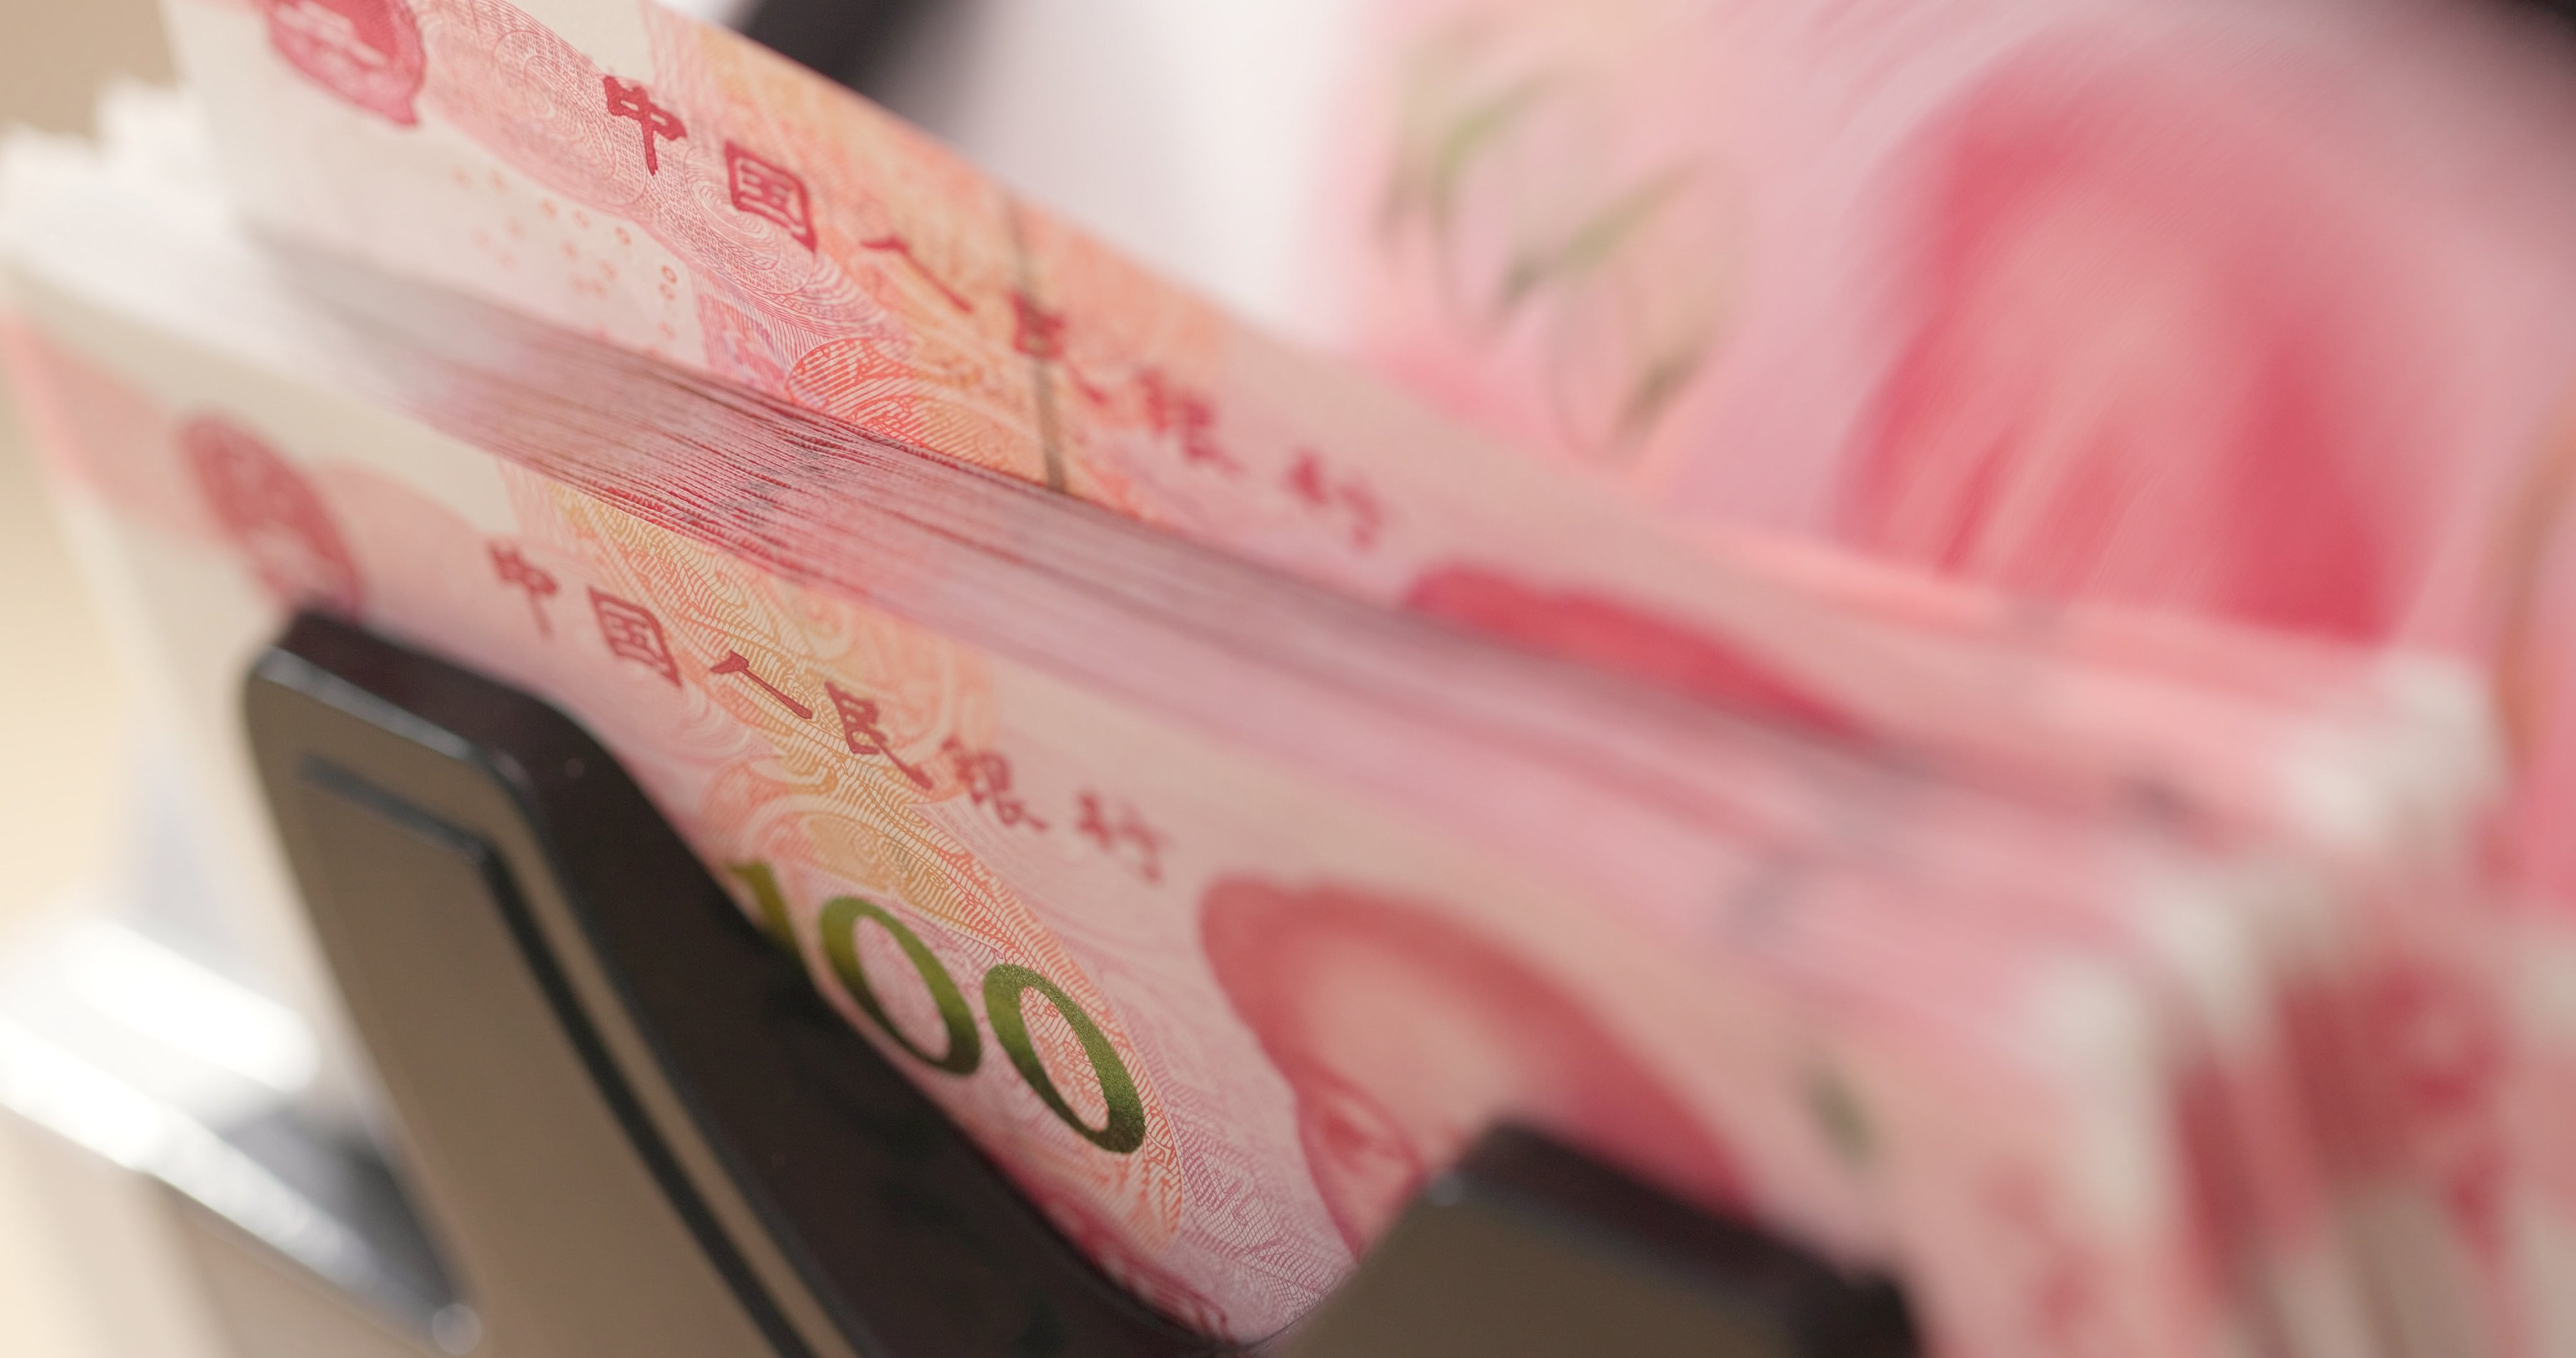 A serious financial crime could get you executed in China, though that is rare nowadays. Photo: Shutterstock